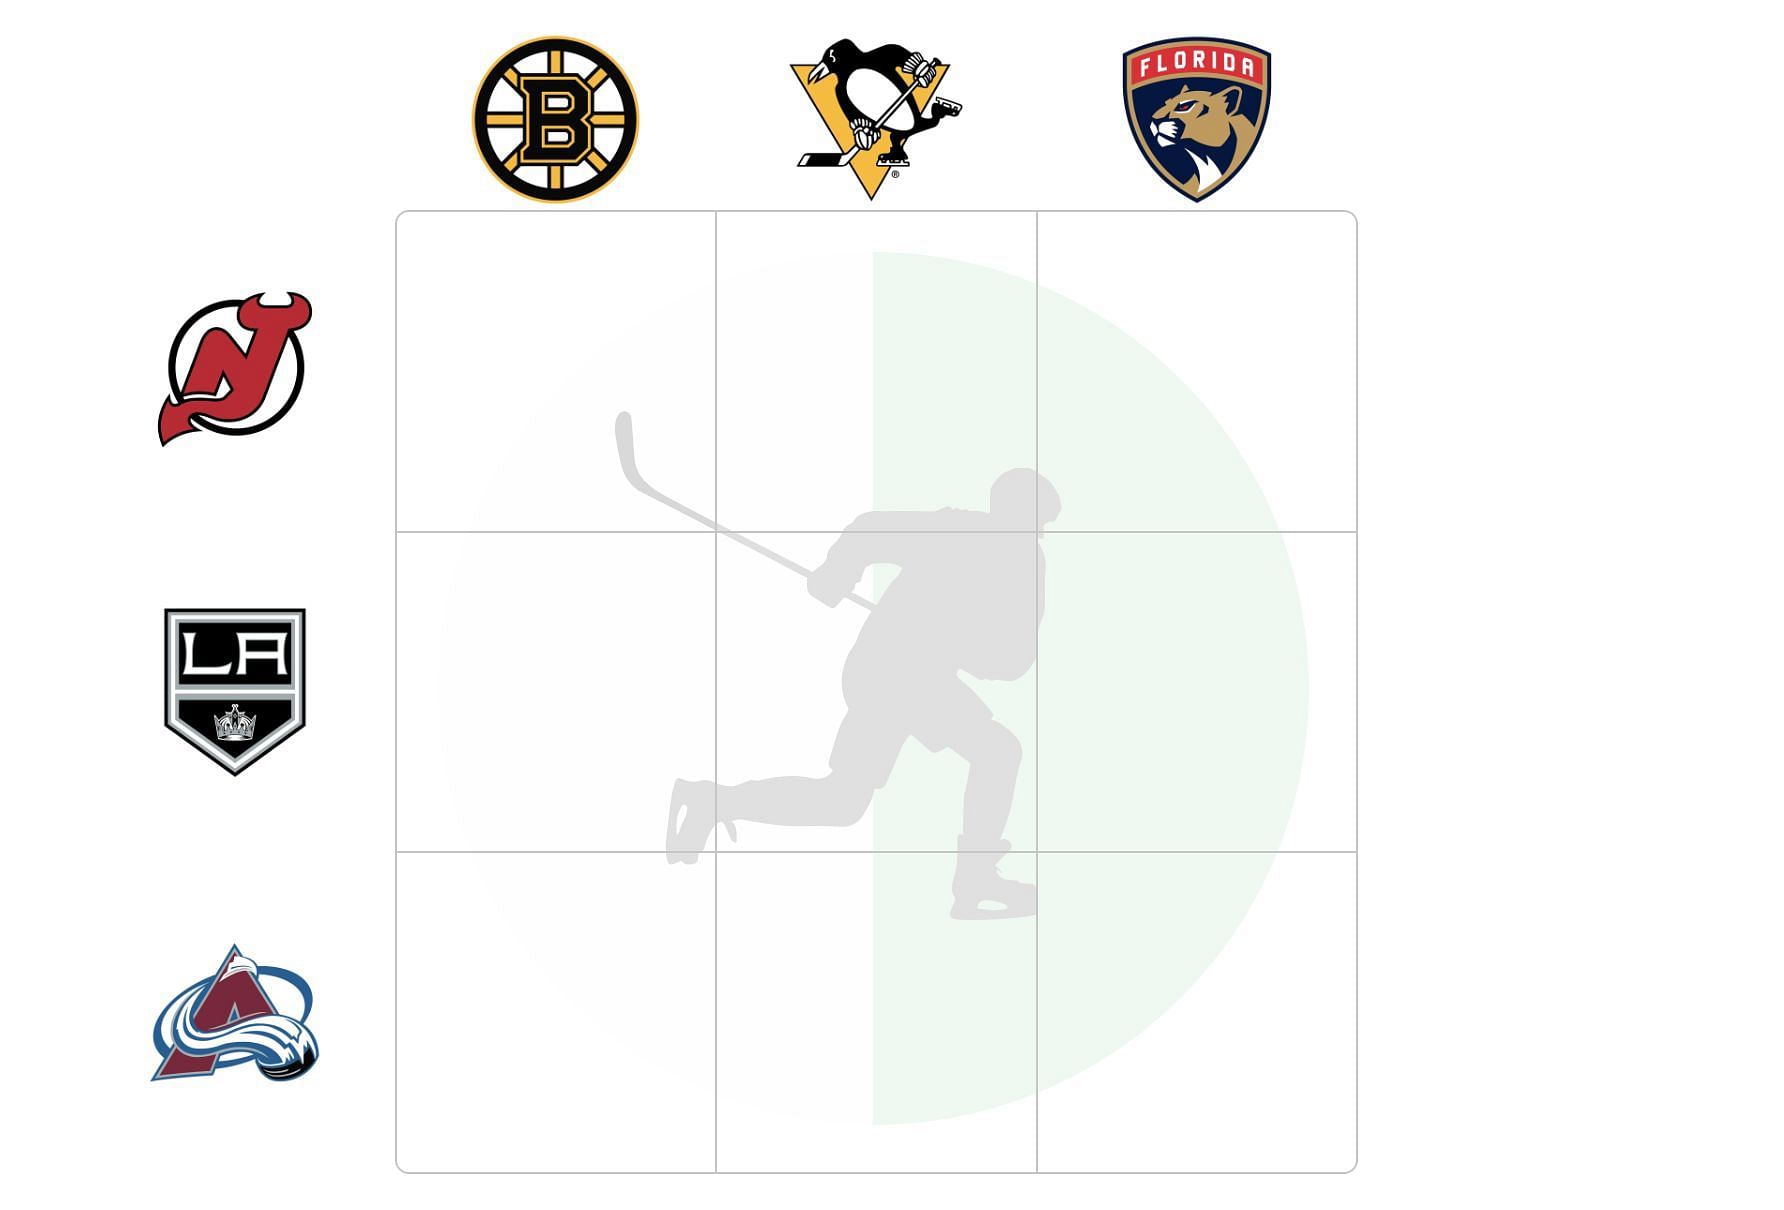 Which participant has performed for the Boston Bruins and Colorado Avalanche? NHL Crossover Grid solutions for July 18